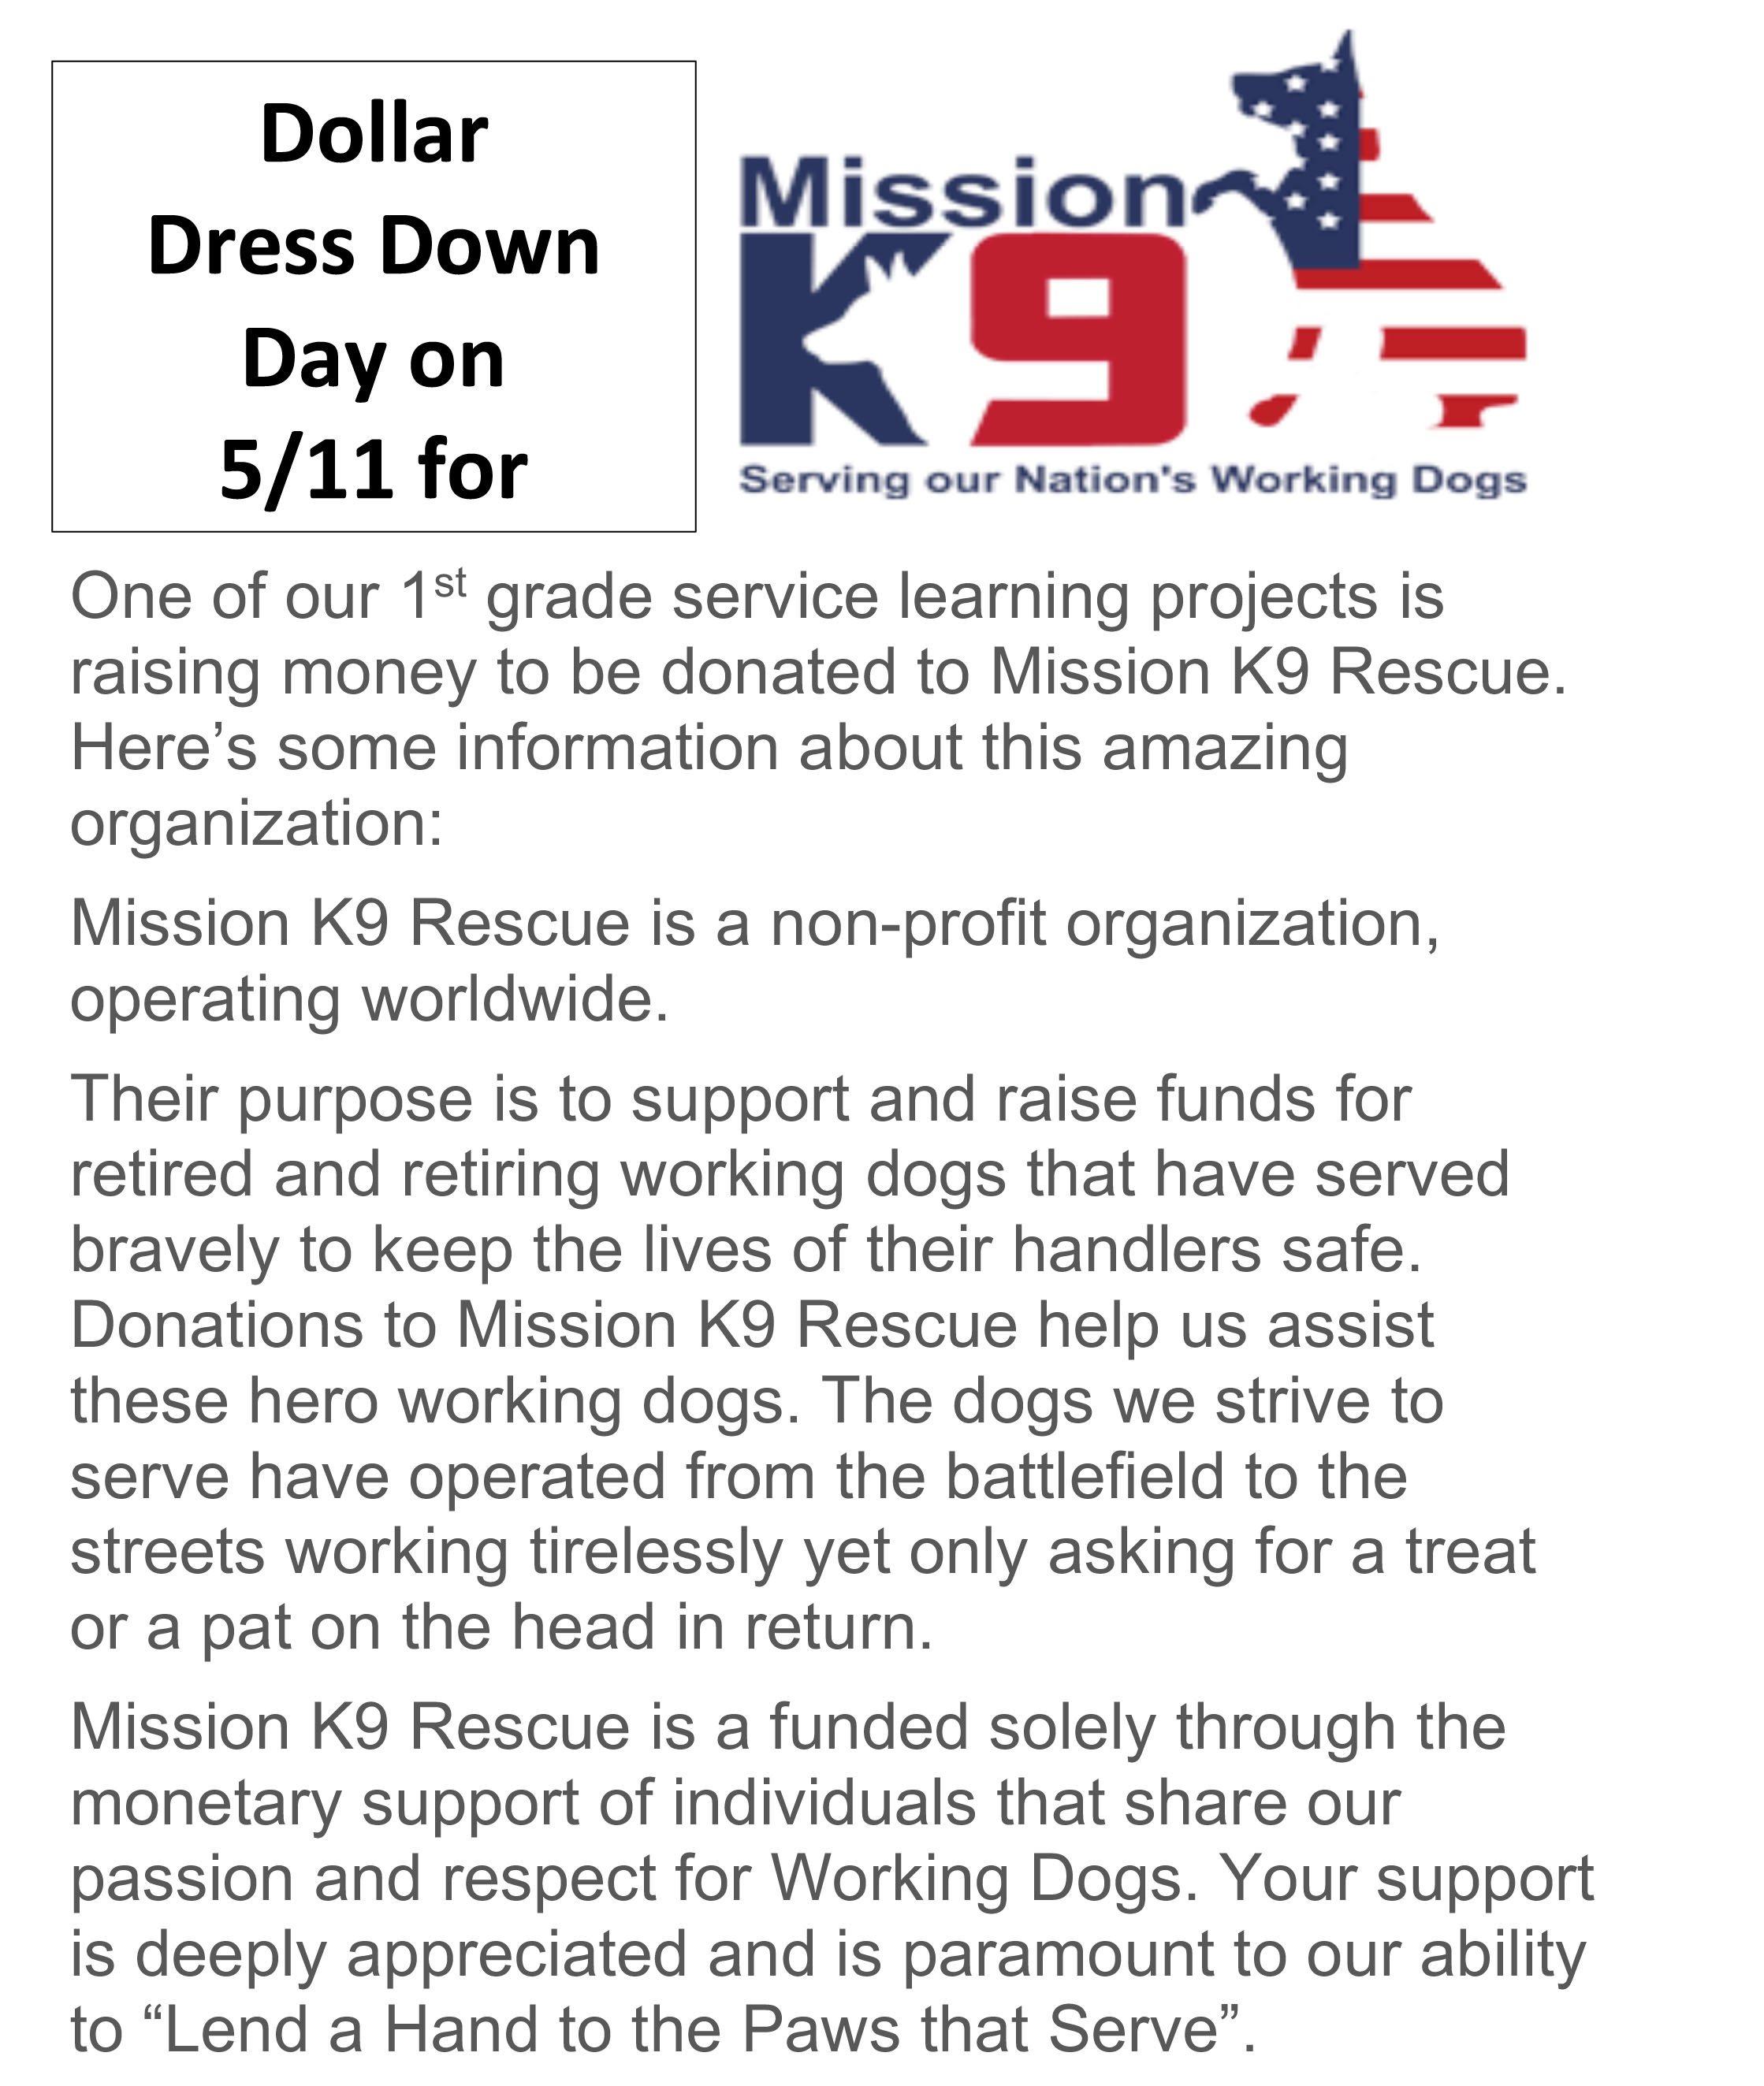 http://qacblogs.org/ronda.hills/files/2018/05/Dollar-Dress-Down-Day-for-Mission-K9-Rescue-Flyer-.jpg